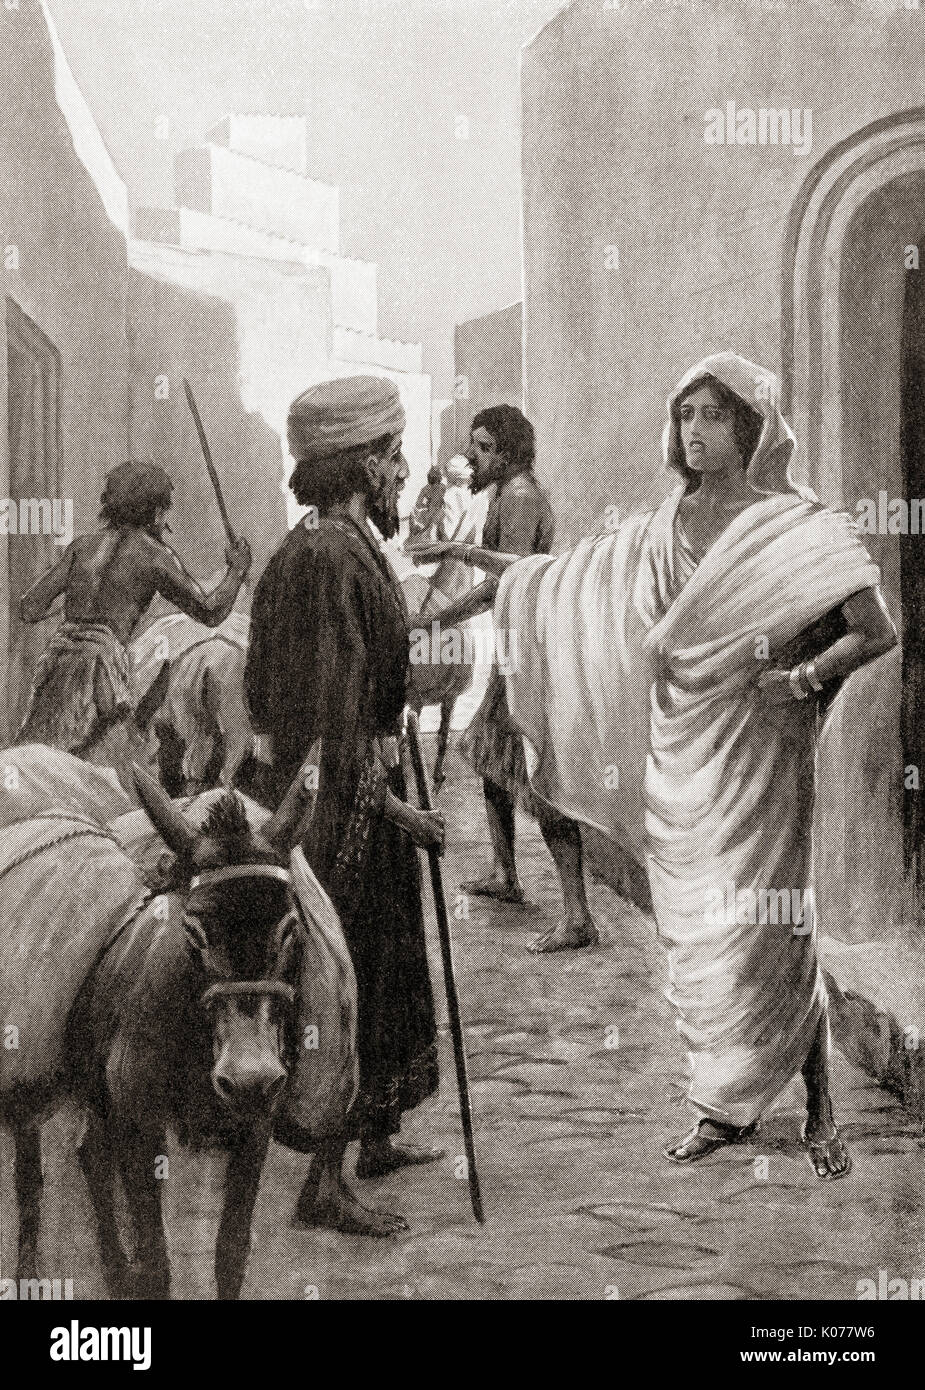 Babylonian votaress despatching a caravan for trade.  Under the first dynasty of Babylon religious votaresses from the upper classes were allowed to engage in commerce on their own account, but were forbidden to open or enter a beer shop, the penalty for misbehaviour was death.  From Hutchinson's History of the Nations, published 1915. Stock Photo